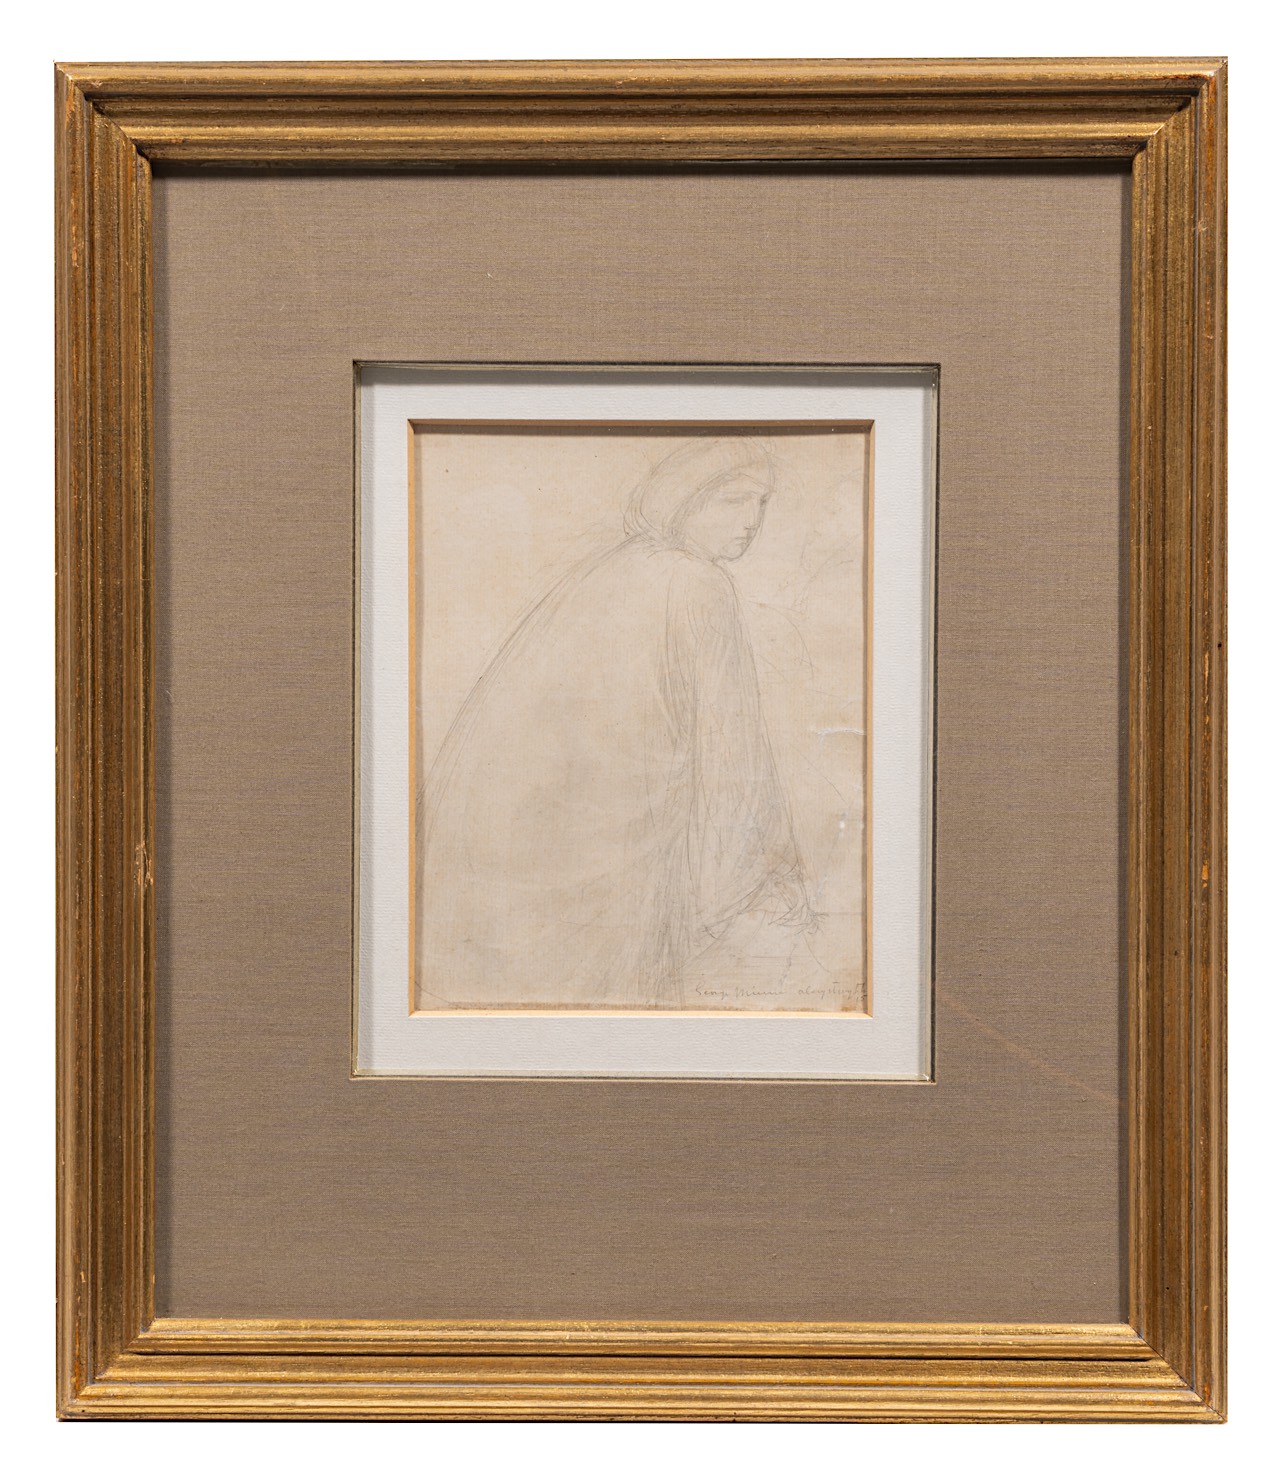 George Minne (1866-1941), study drawing, 1915, pencil on paper 23 x 17.5 cm. (9.0 x 6.8 in.), Frame: - Image 2 of 5